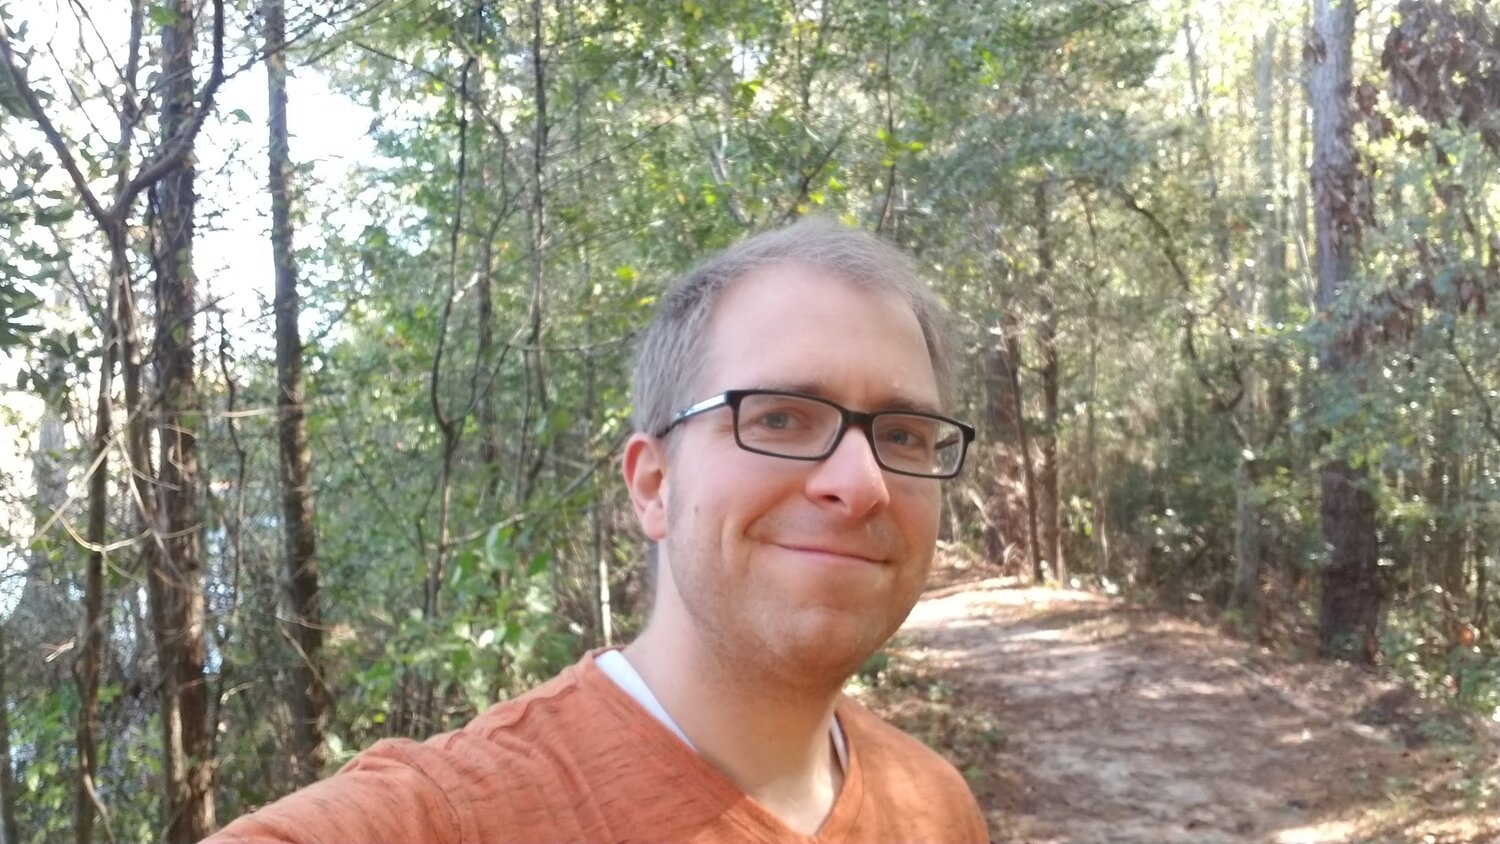 Man with glasses and orange shirt smiling on Goodale Lakeside Trail